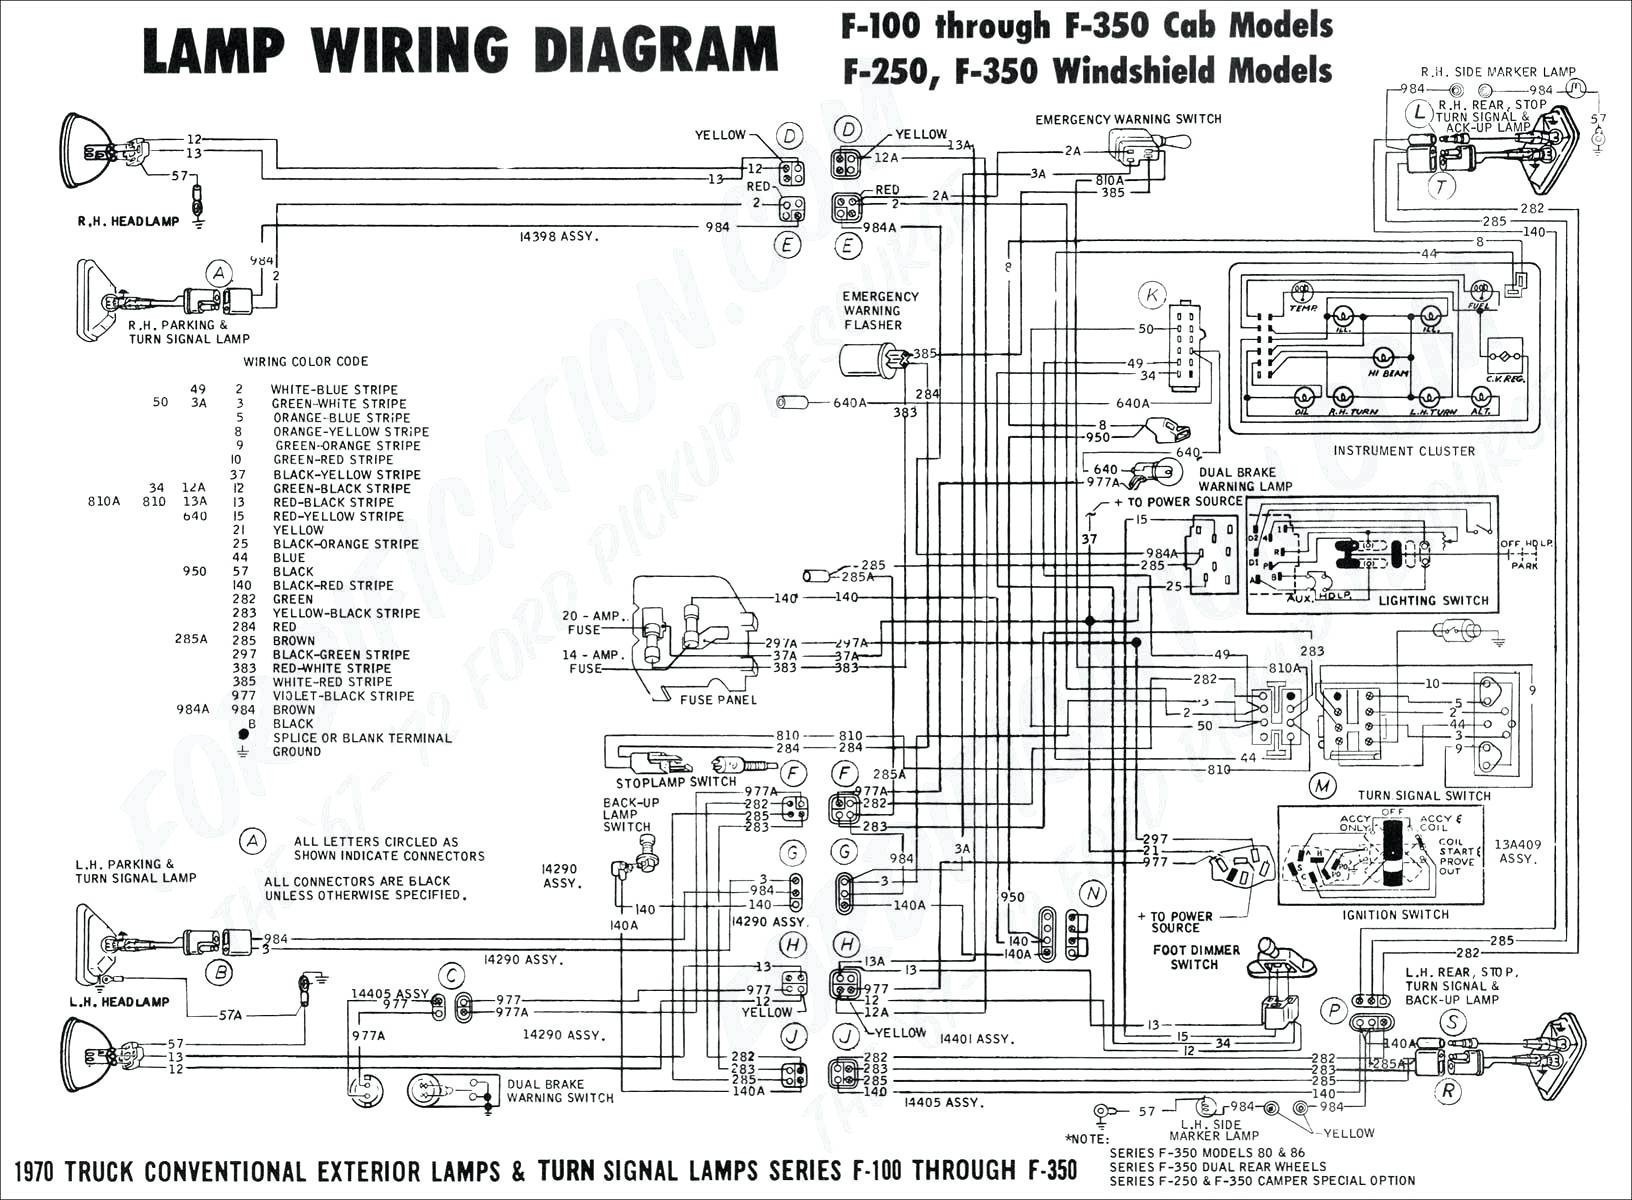 Banshee Engine Diagram Briggs and Stratton Ignition System Diagram Wiring Diagram Paper Of Banshee Engine Diagram